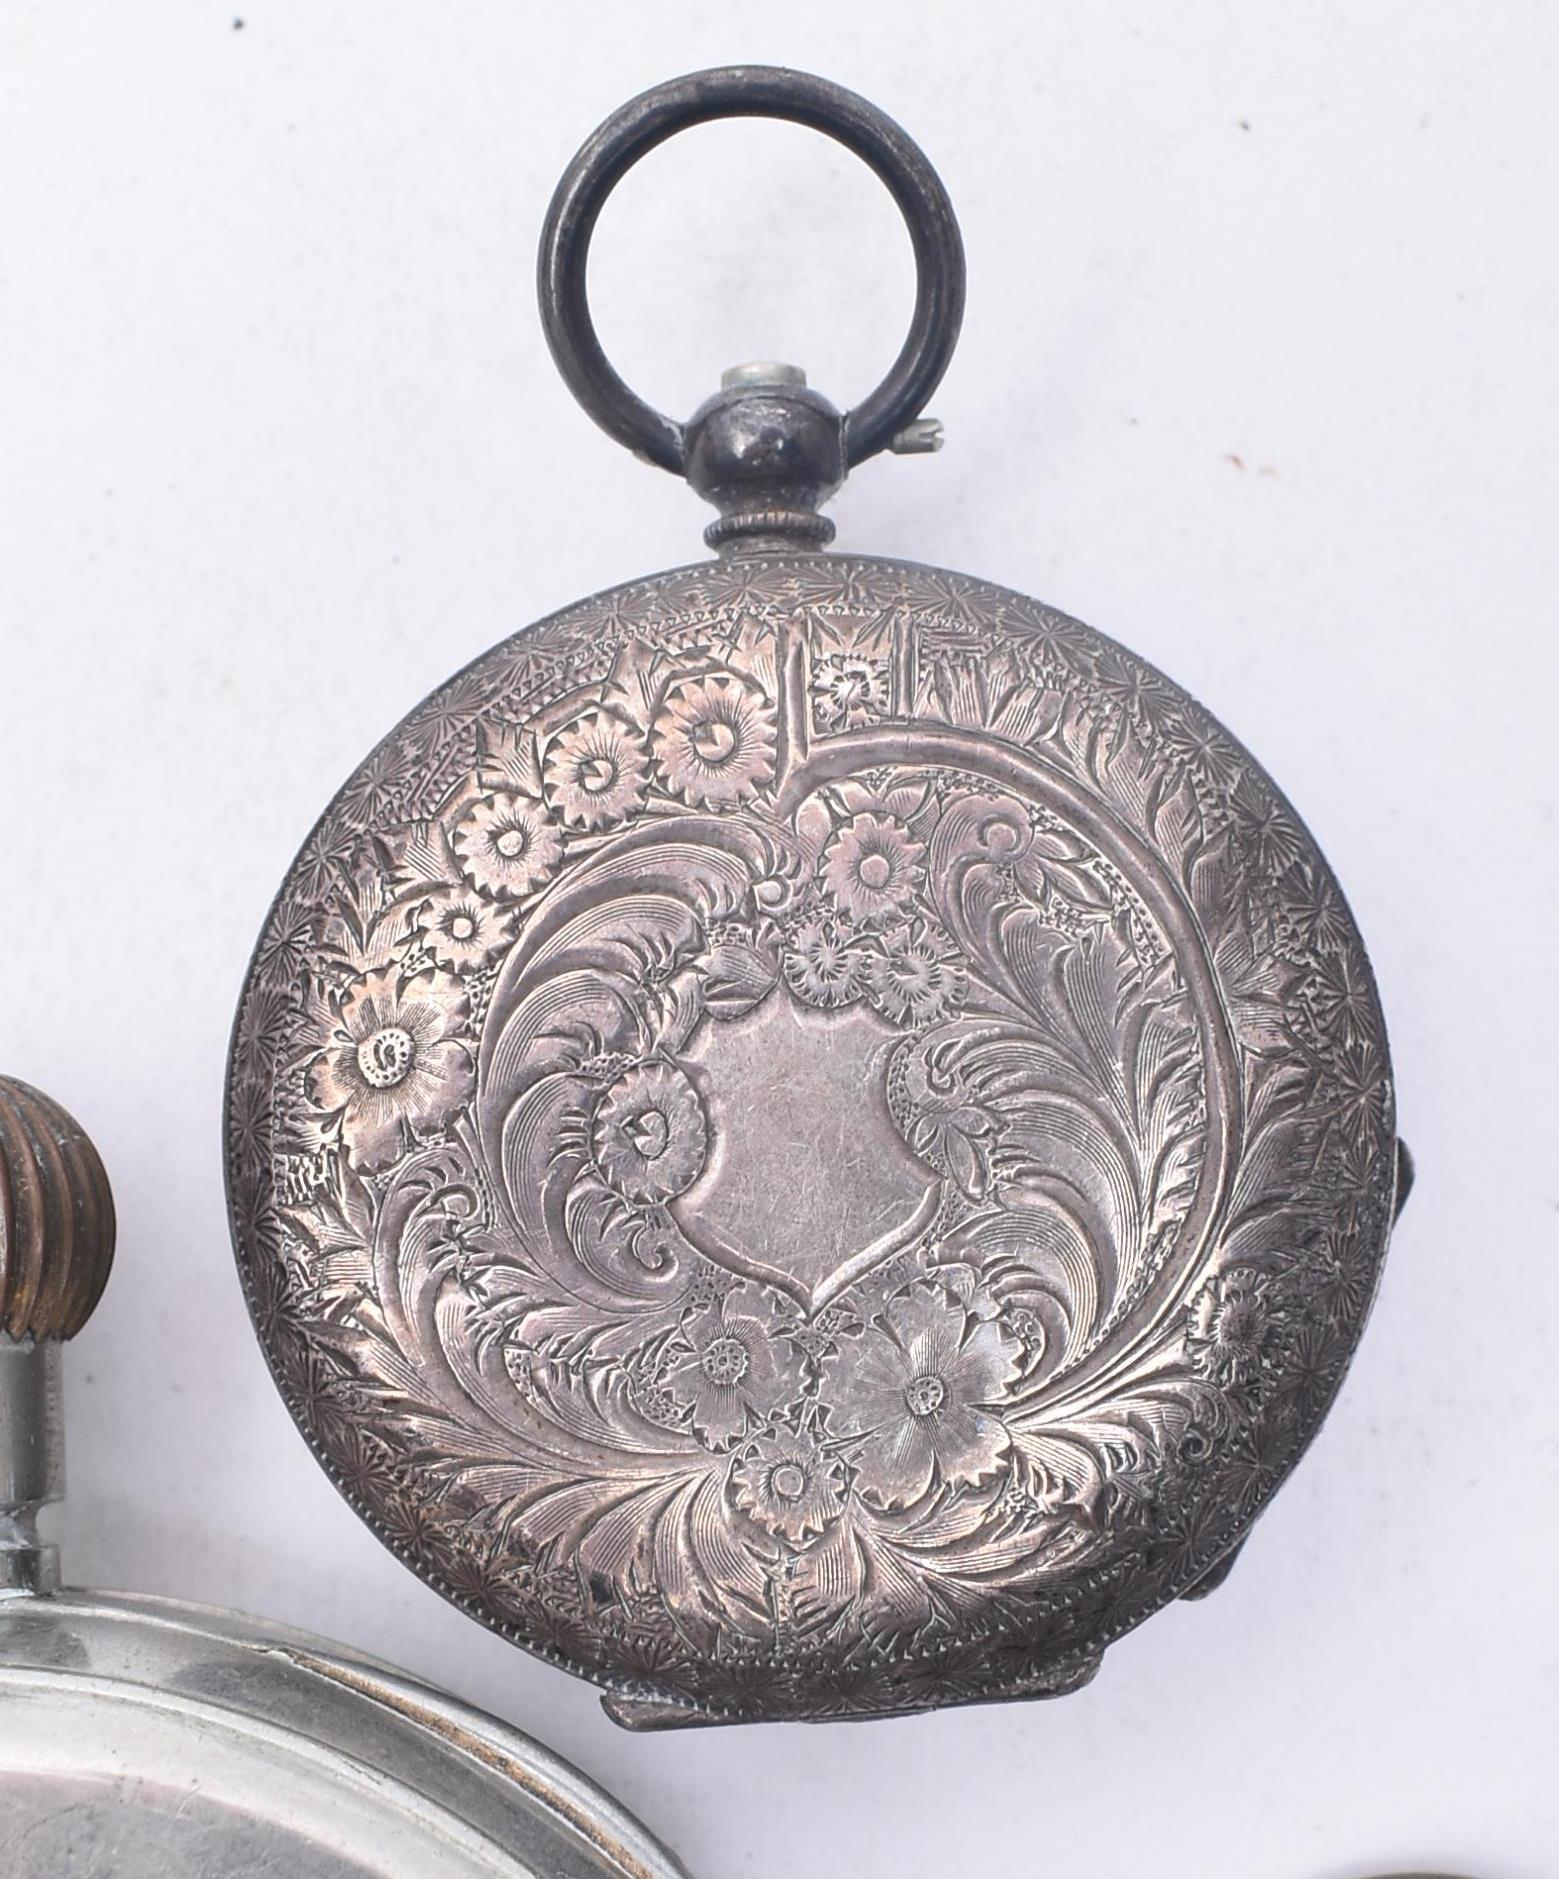 COLLECTION OF EARLY-MID 20TH CENTURY GENTS' POCKET WATCHES - Image 8 of 10